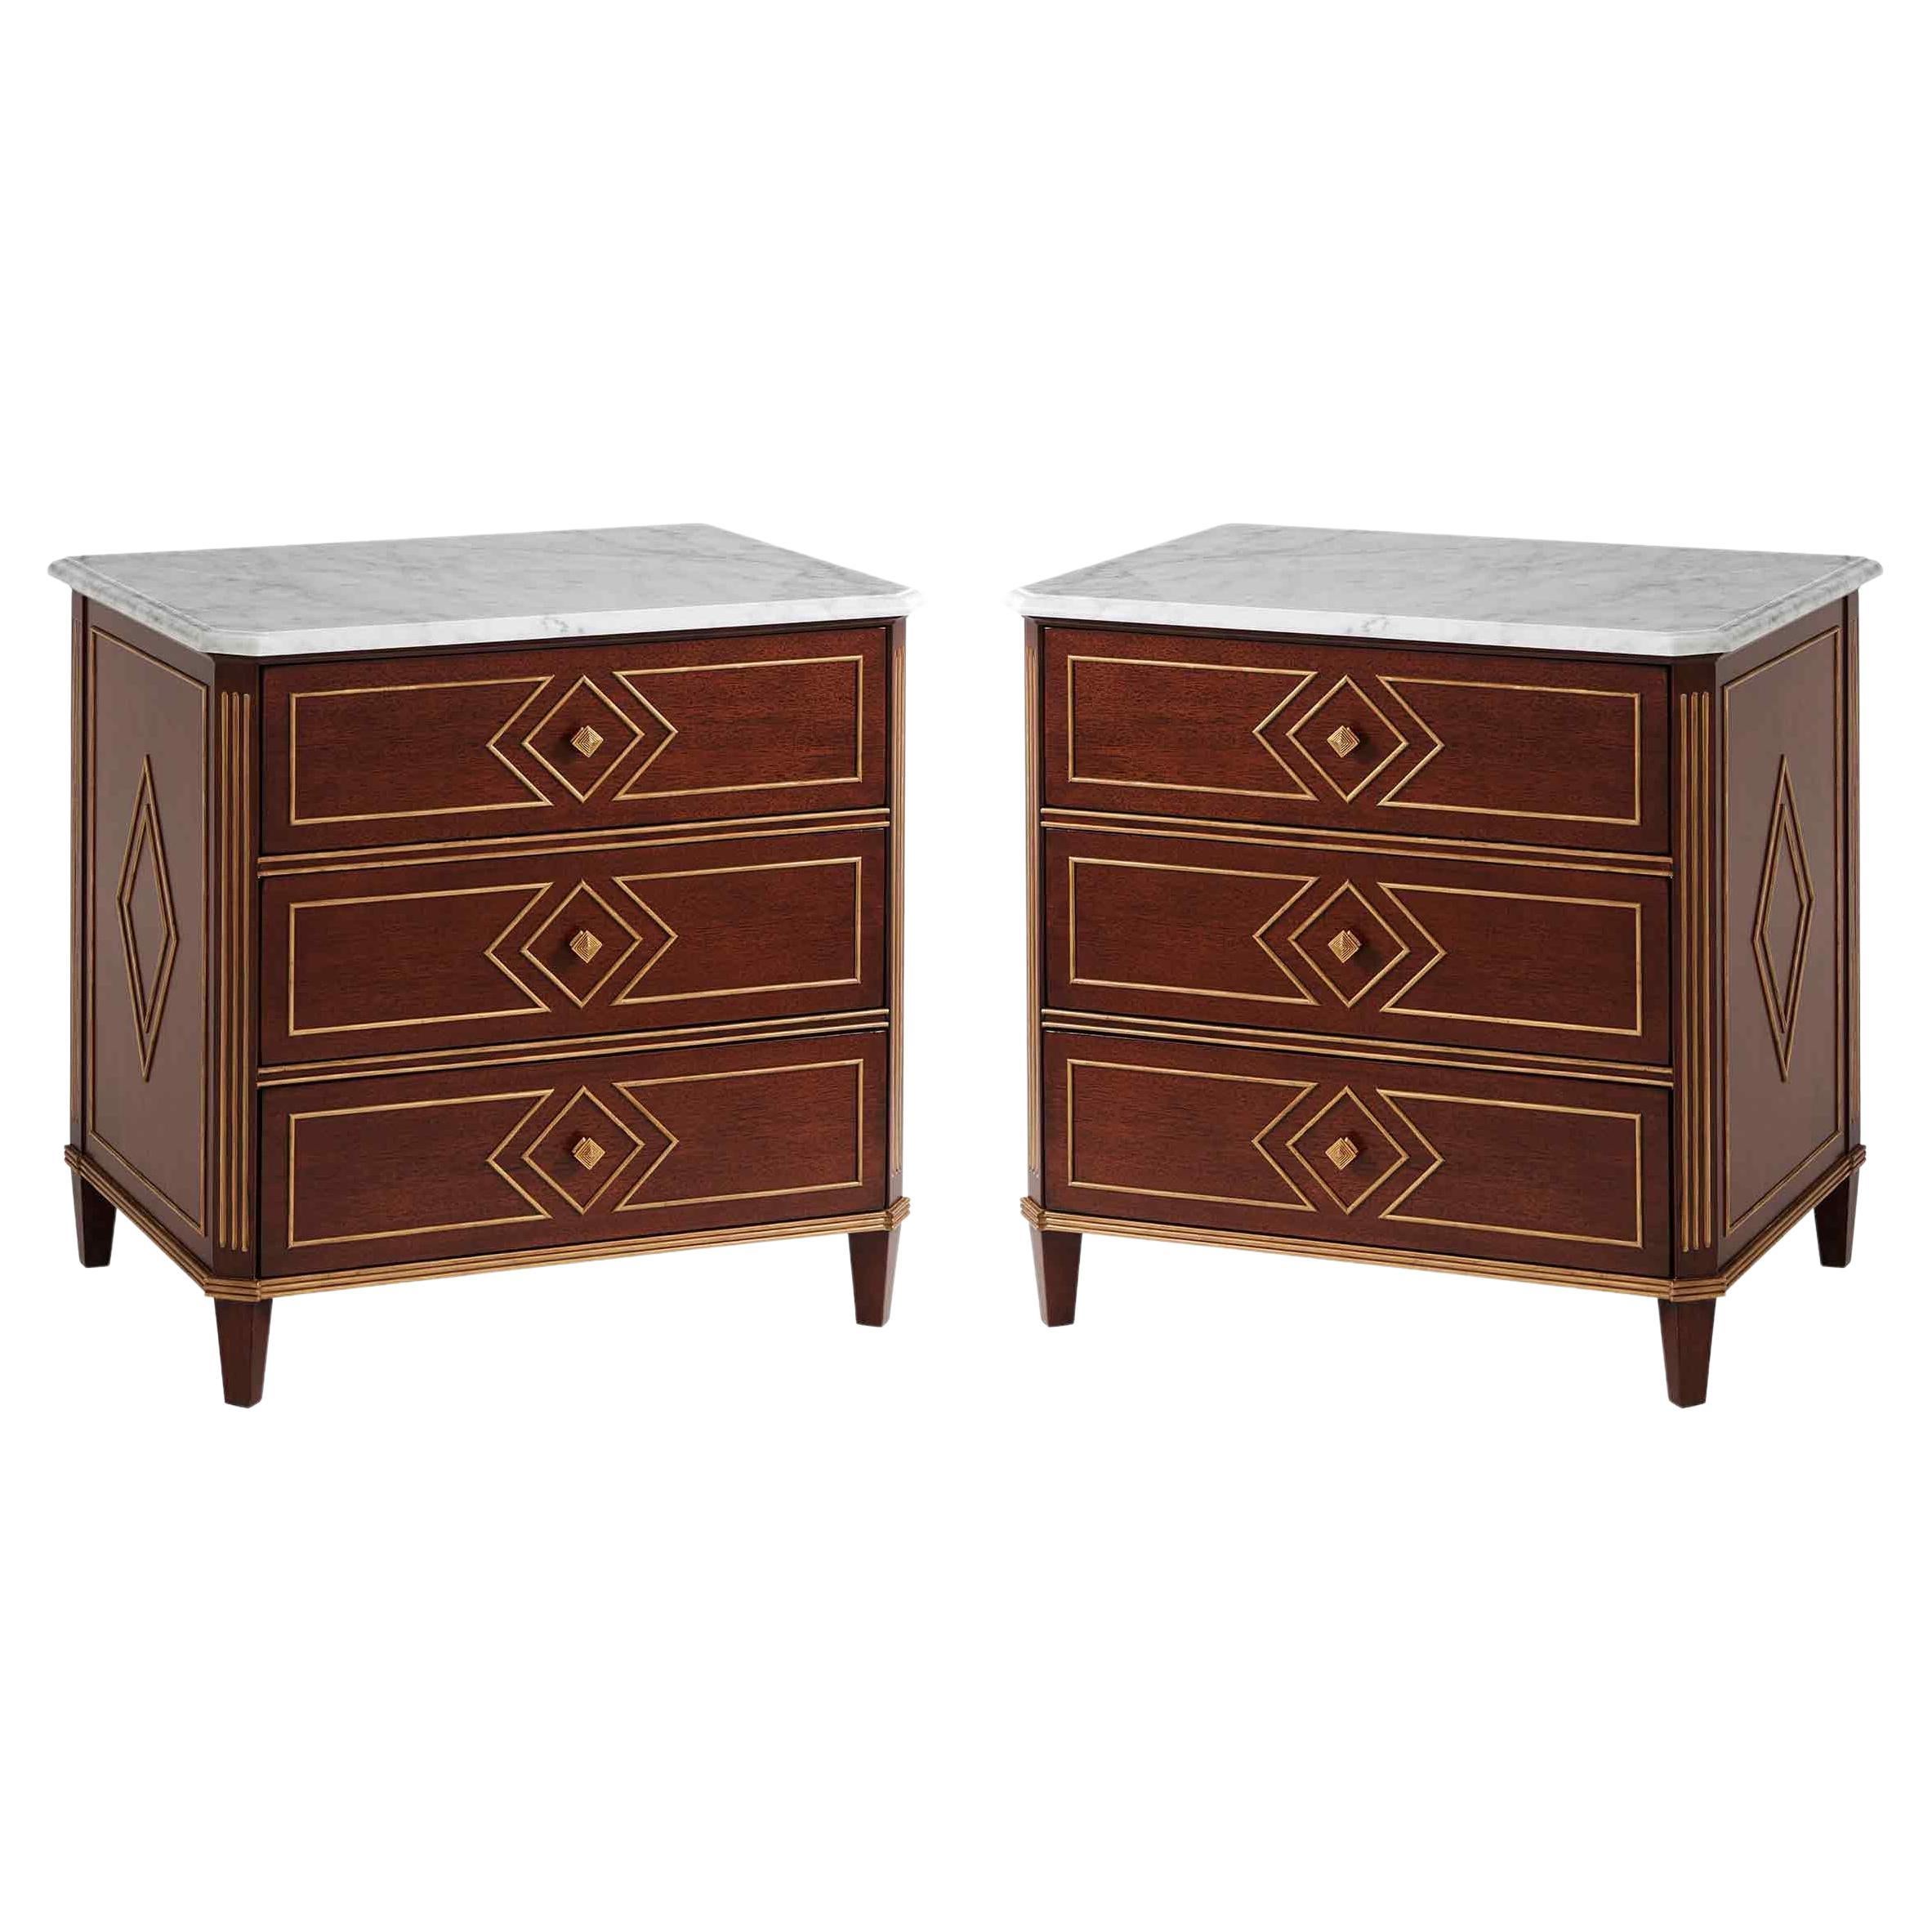 Pair of Russian Neoclassic Style Nightstands For Sale